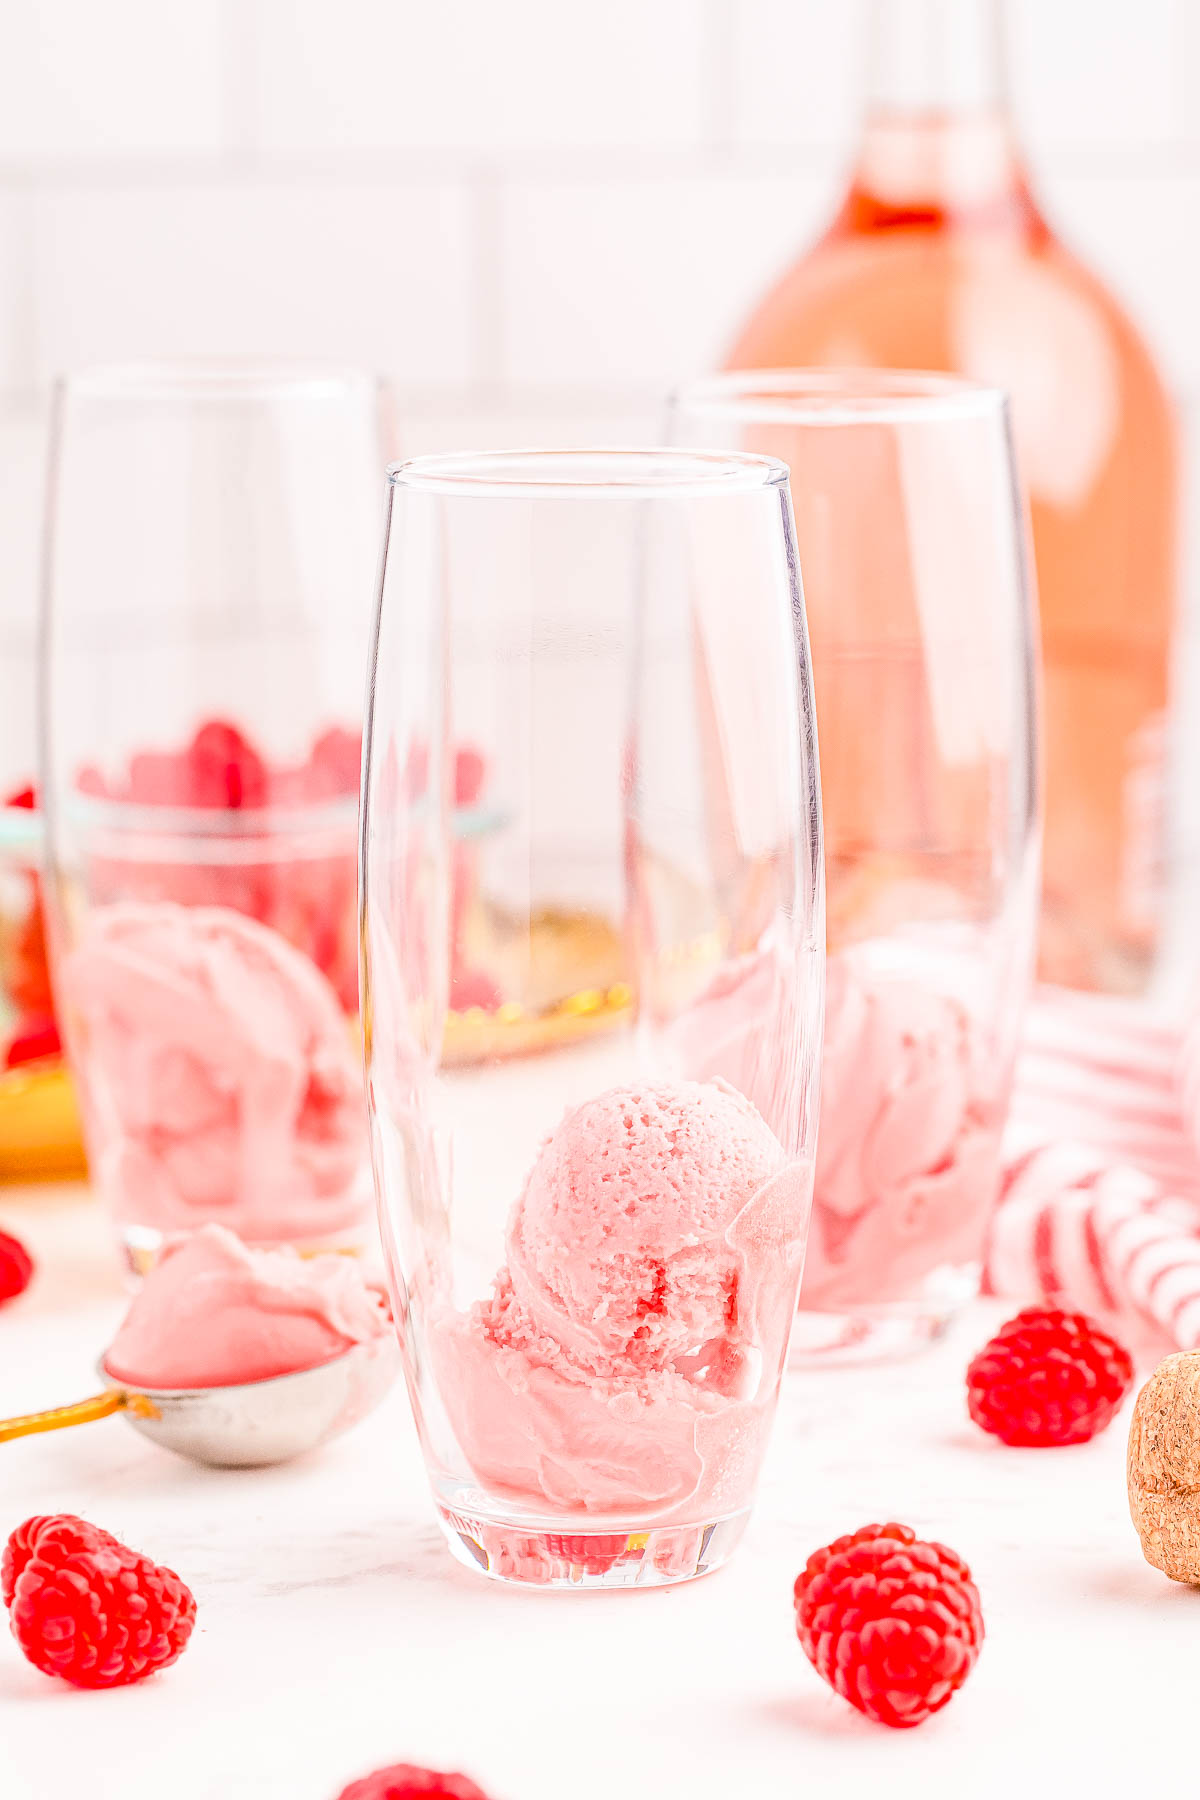 Three tall glasses each containing a scoop of pink ice cream, surrounded by fresh raspberries and an open bottle of rosé in the background.